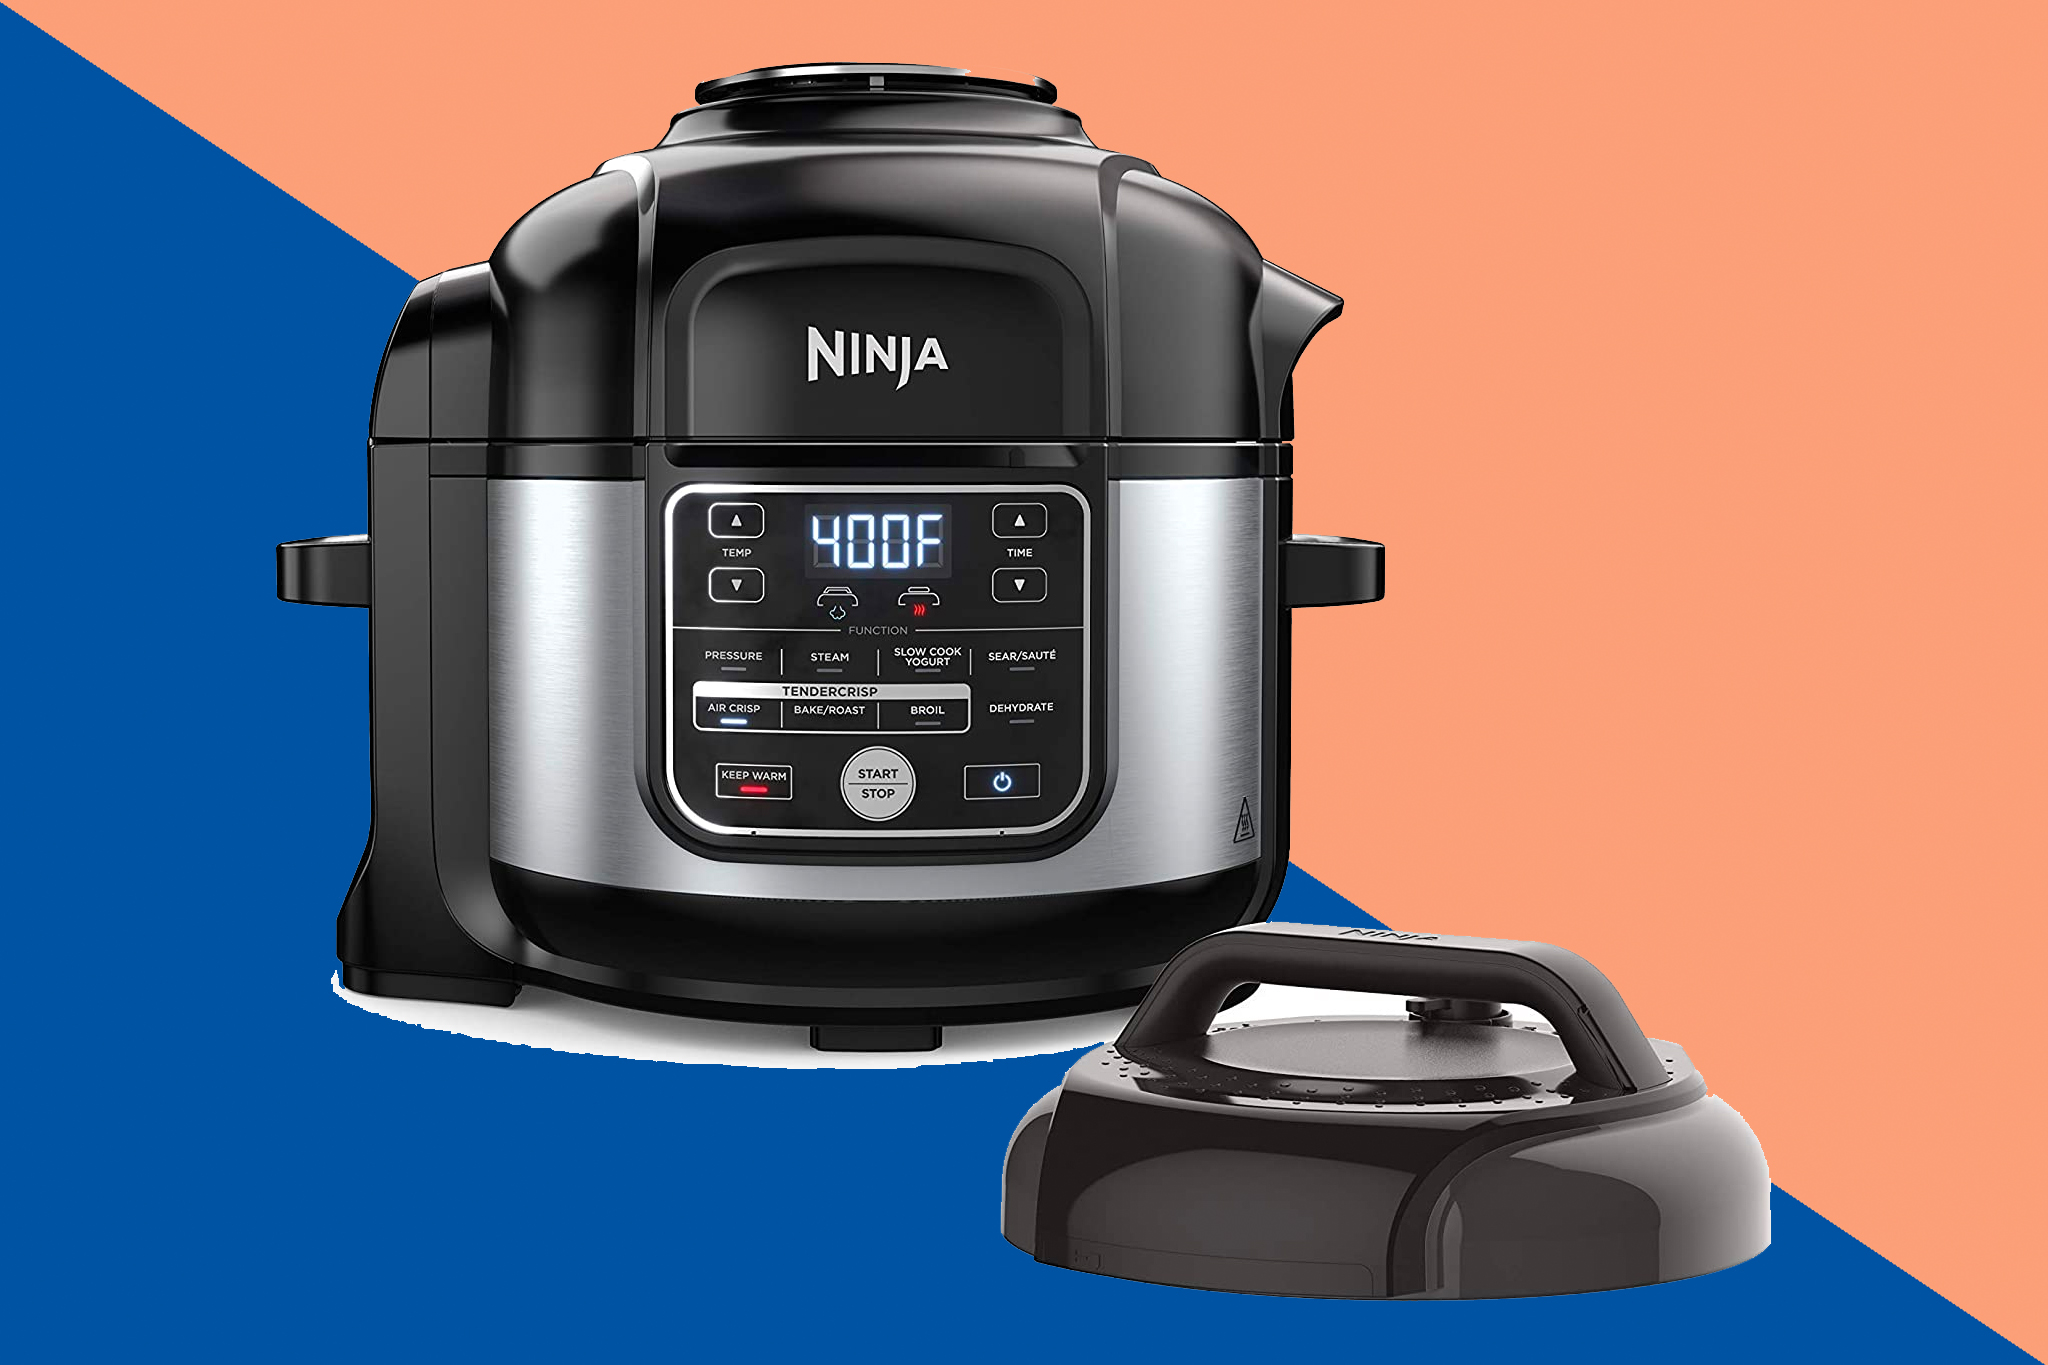 Renewed and a Stainless Finish Ninja OS301 Foodi 10-in-1 Pressure Cooker and Air Fryer with Nesting Broil Rack 6.5-Quart Capacity 